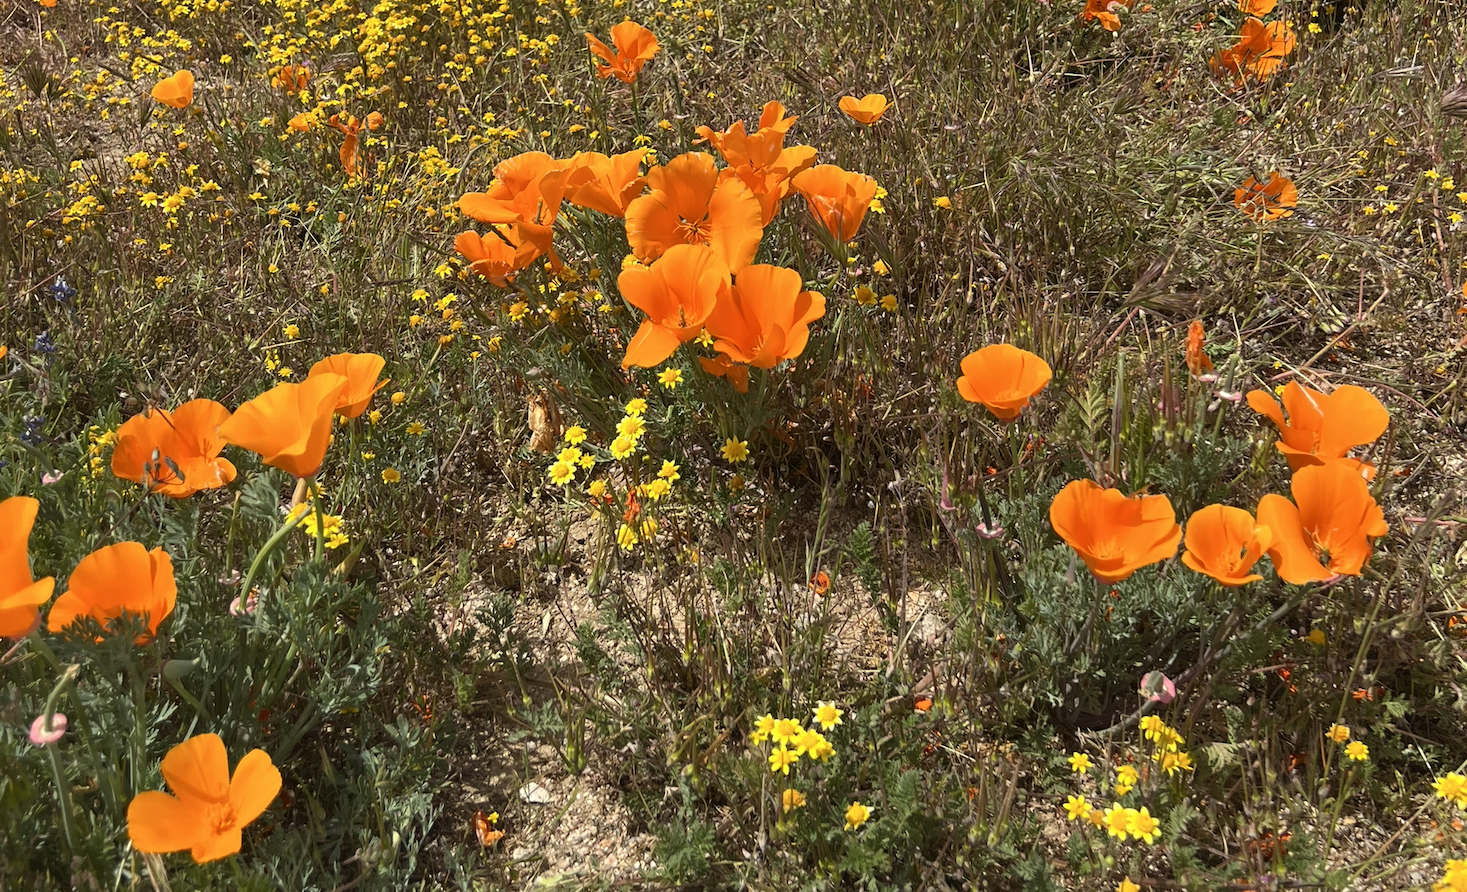 Antelope Valley California Poppy Reserve, close up of the poppies